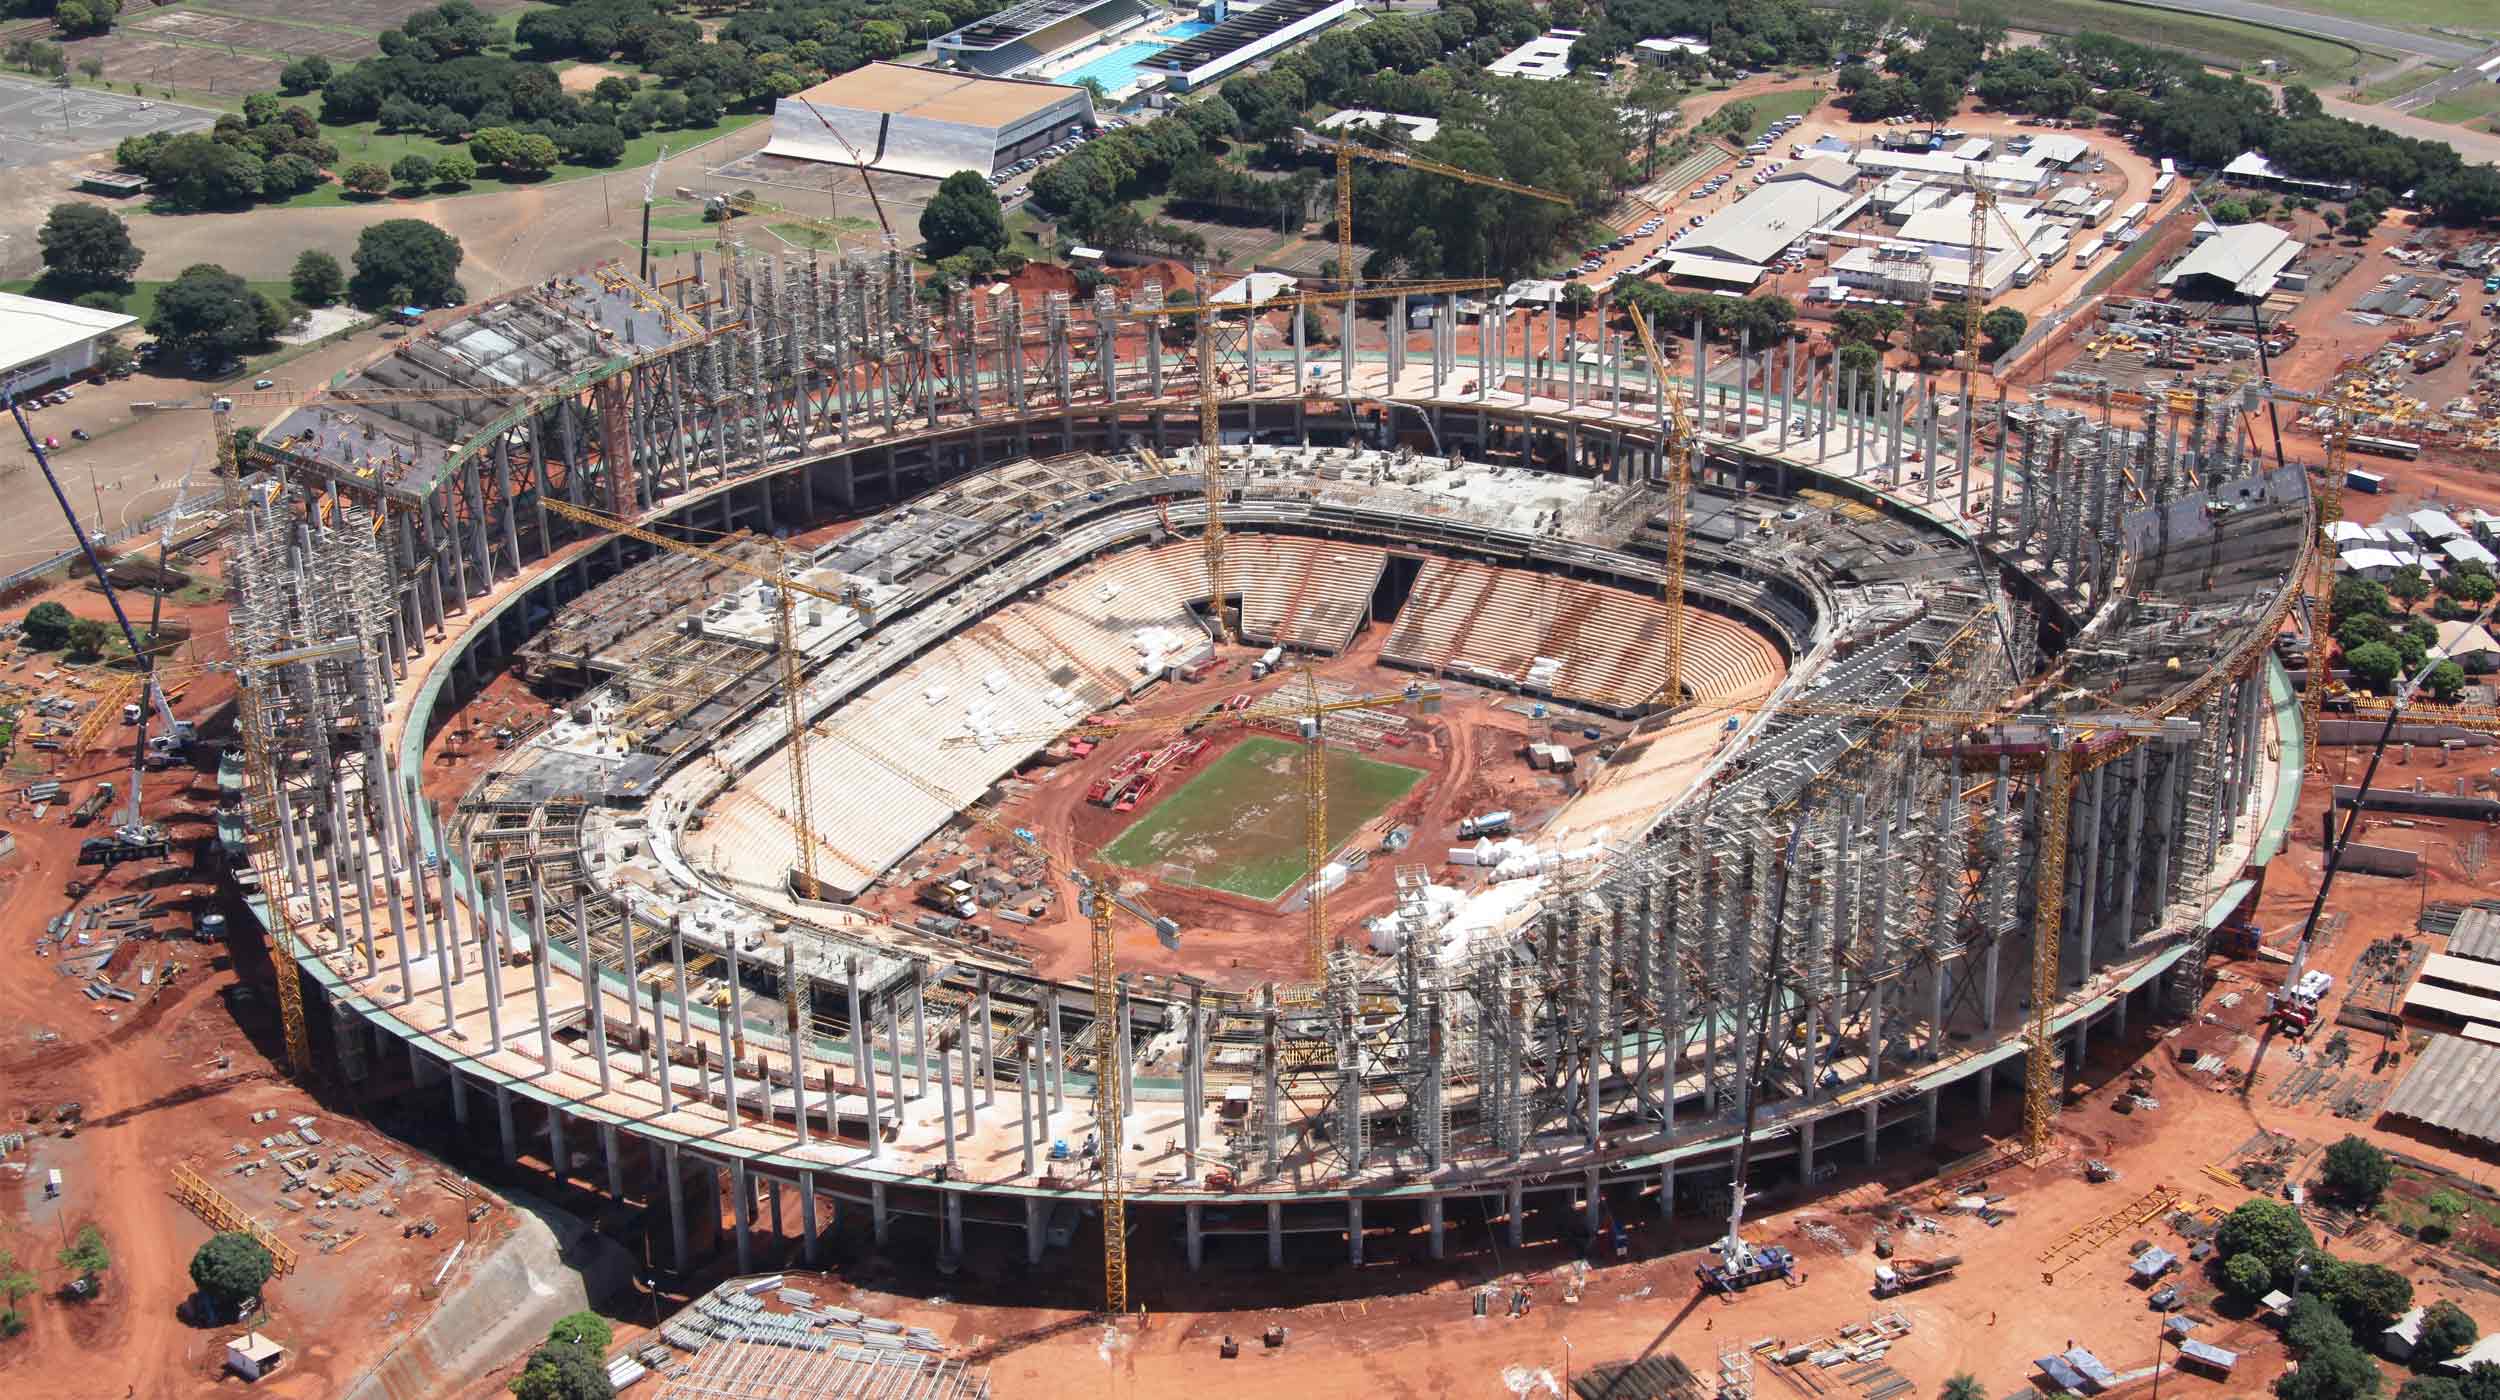 Best known as Mane Garrincha, it is one of the main venues of the 2014 Football World Cup.